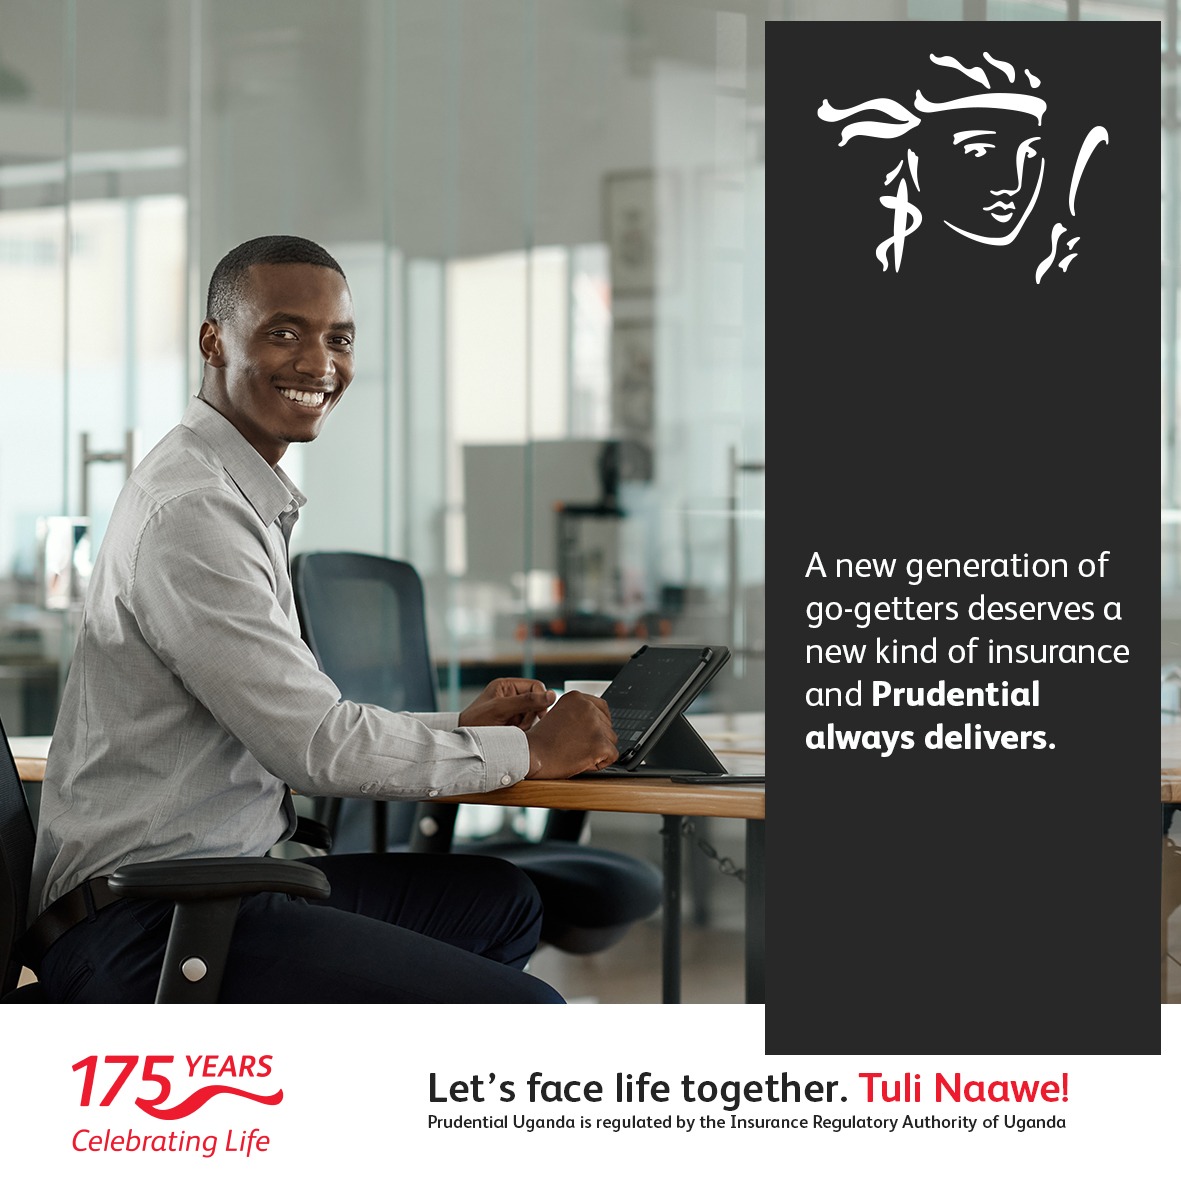 You are an ambitious person with big dreams. Today marks the beginning of securing the finances that will nurture those dreams, and Prudential has the financial solutions to suit your unique needs. 

Let's help you get started.

#WeDoProtection 
#LetsfacelifeTogether
#TuliNaawe